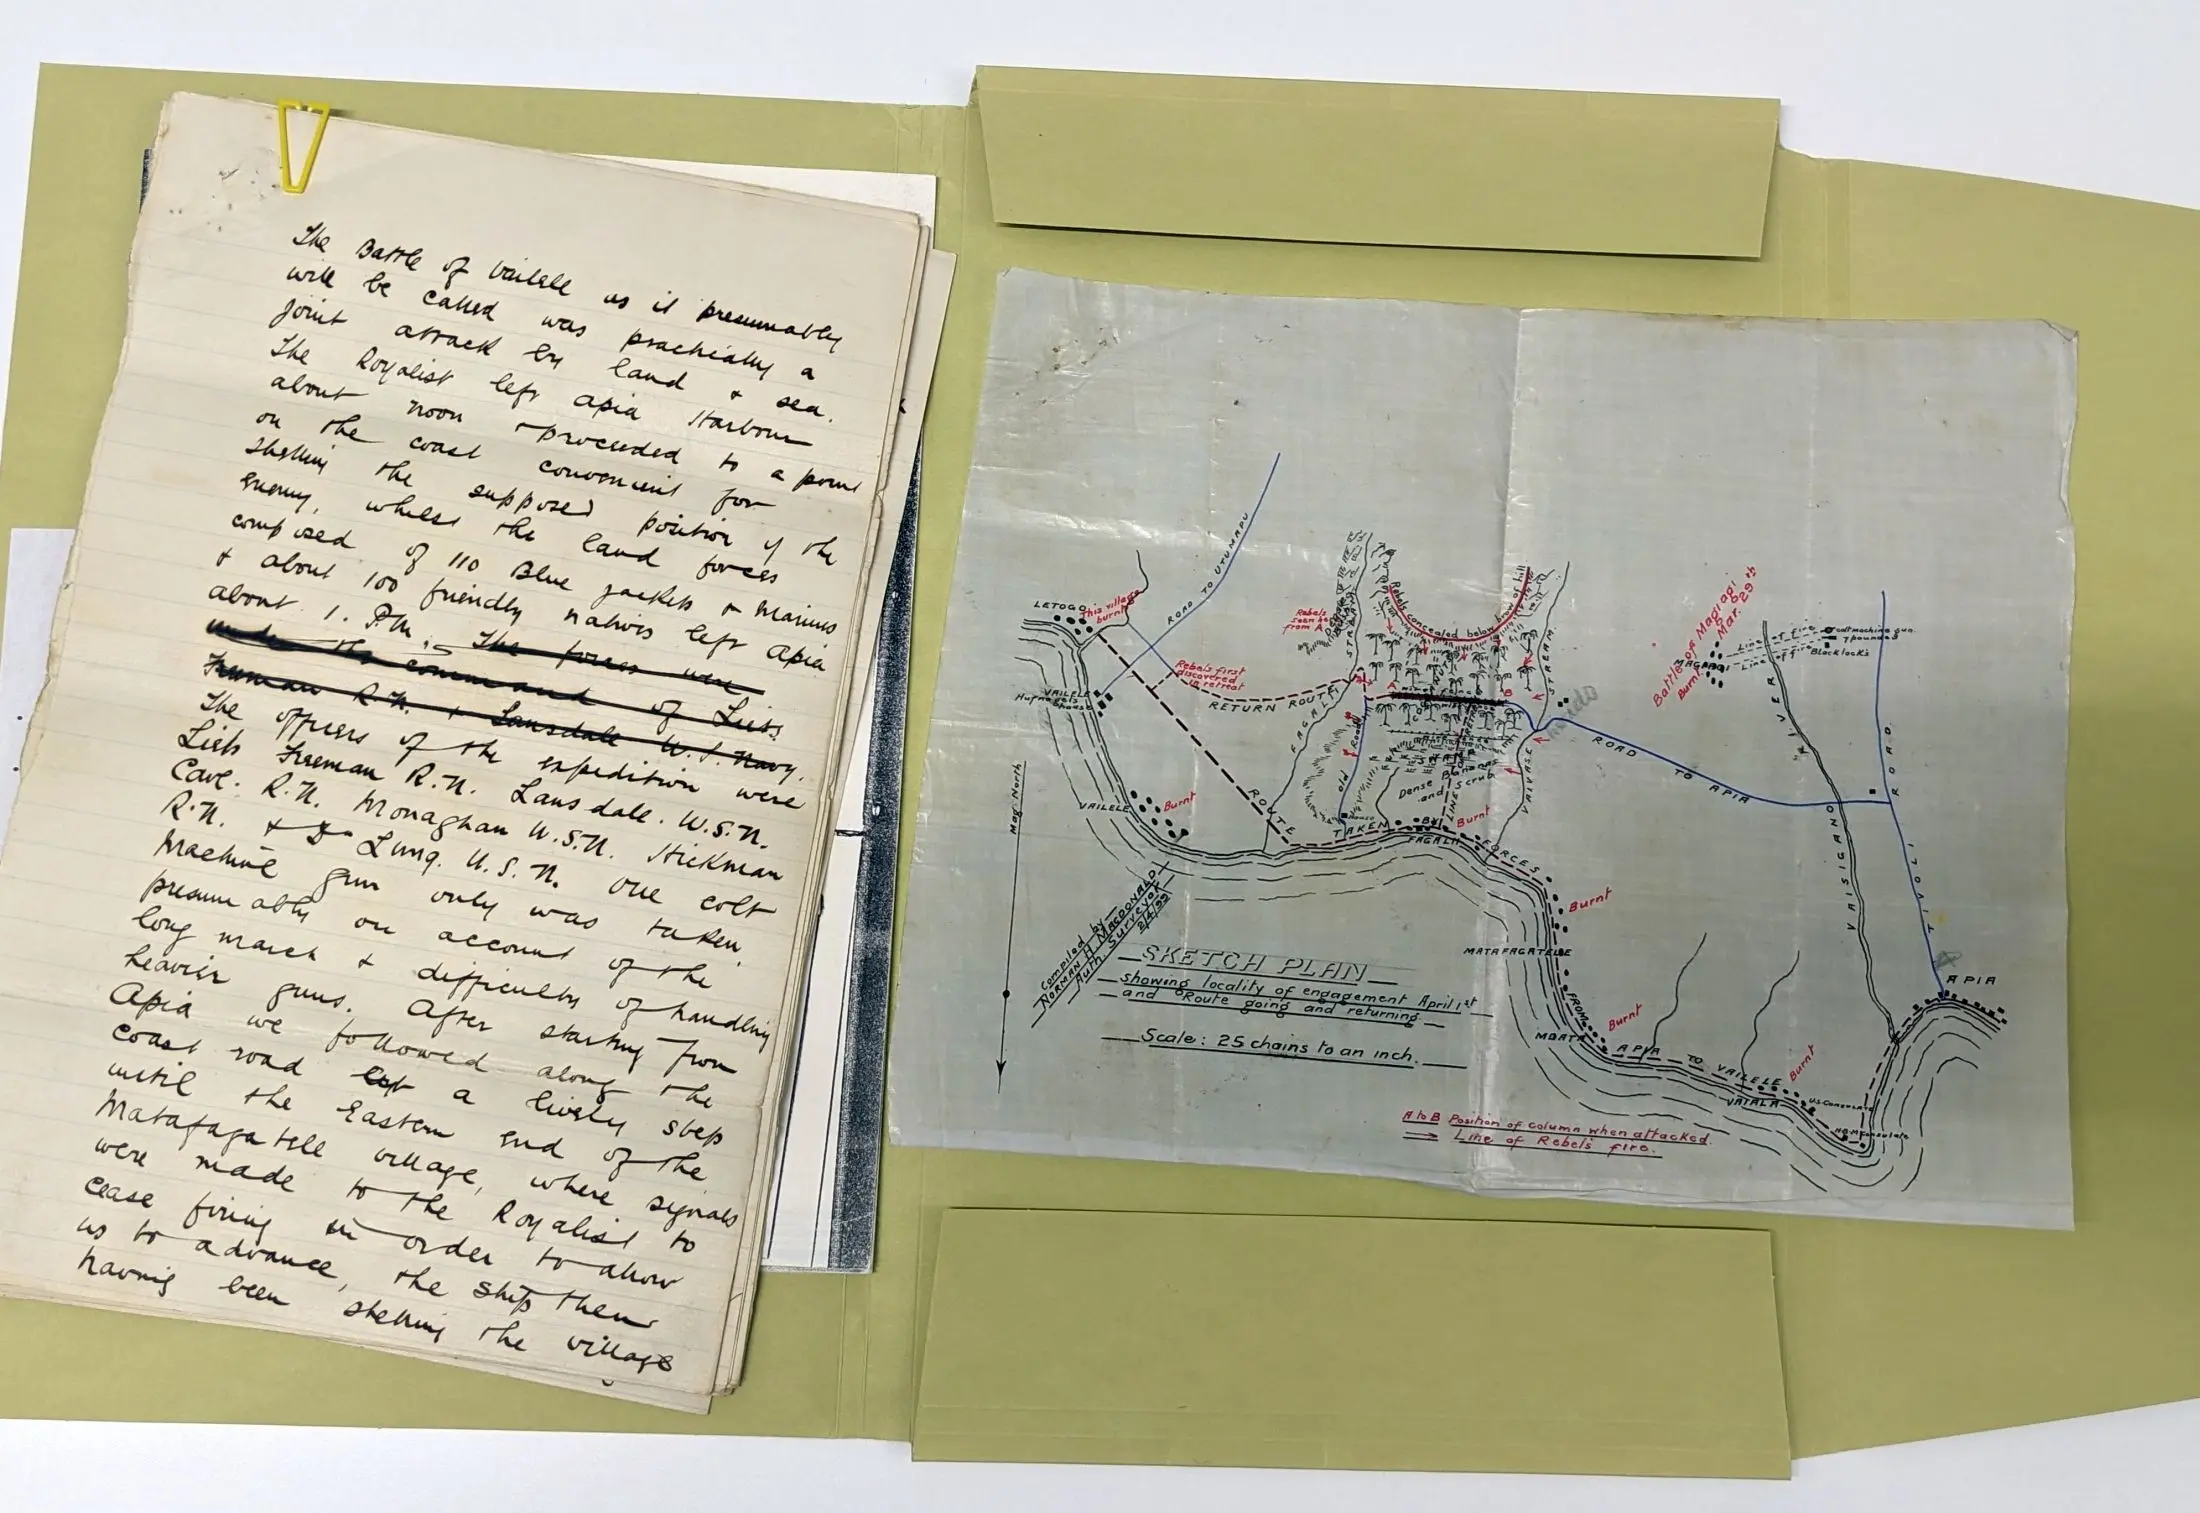 An open folder with a reproduction of a hand-drawn map on the right and a yellowed page of handwritten text on the left. 